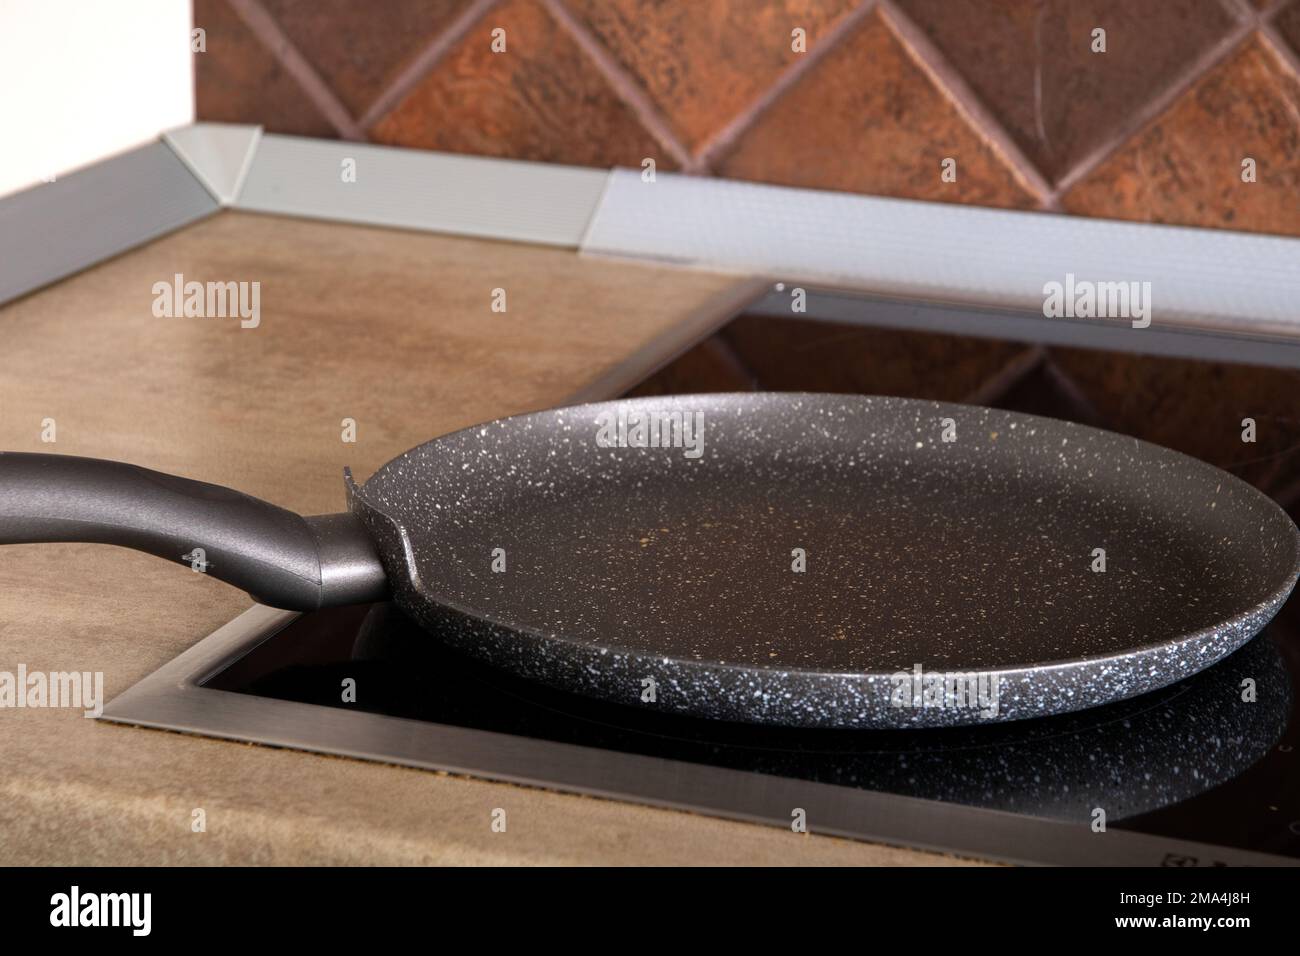 photo of an empty frying pan on the stove in the kitchen Stock Photo